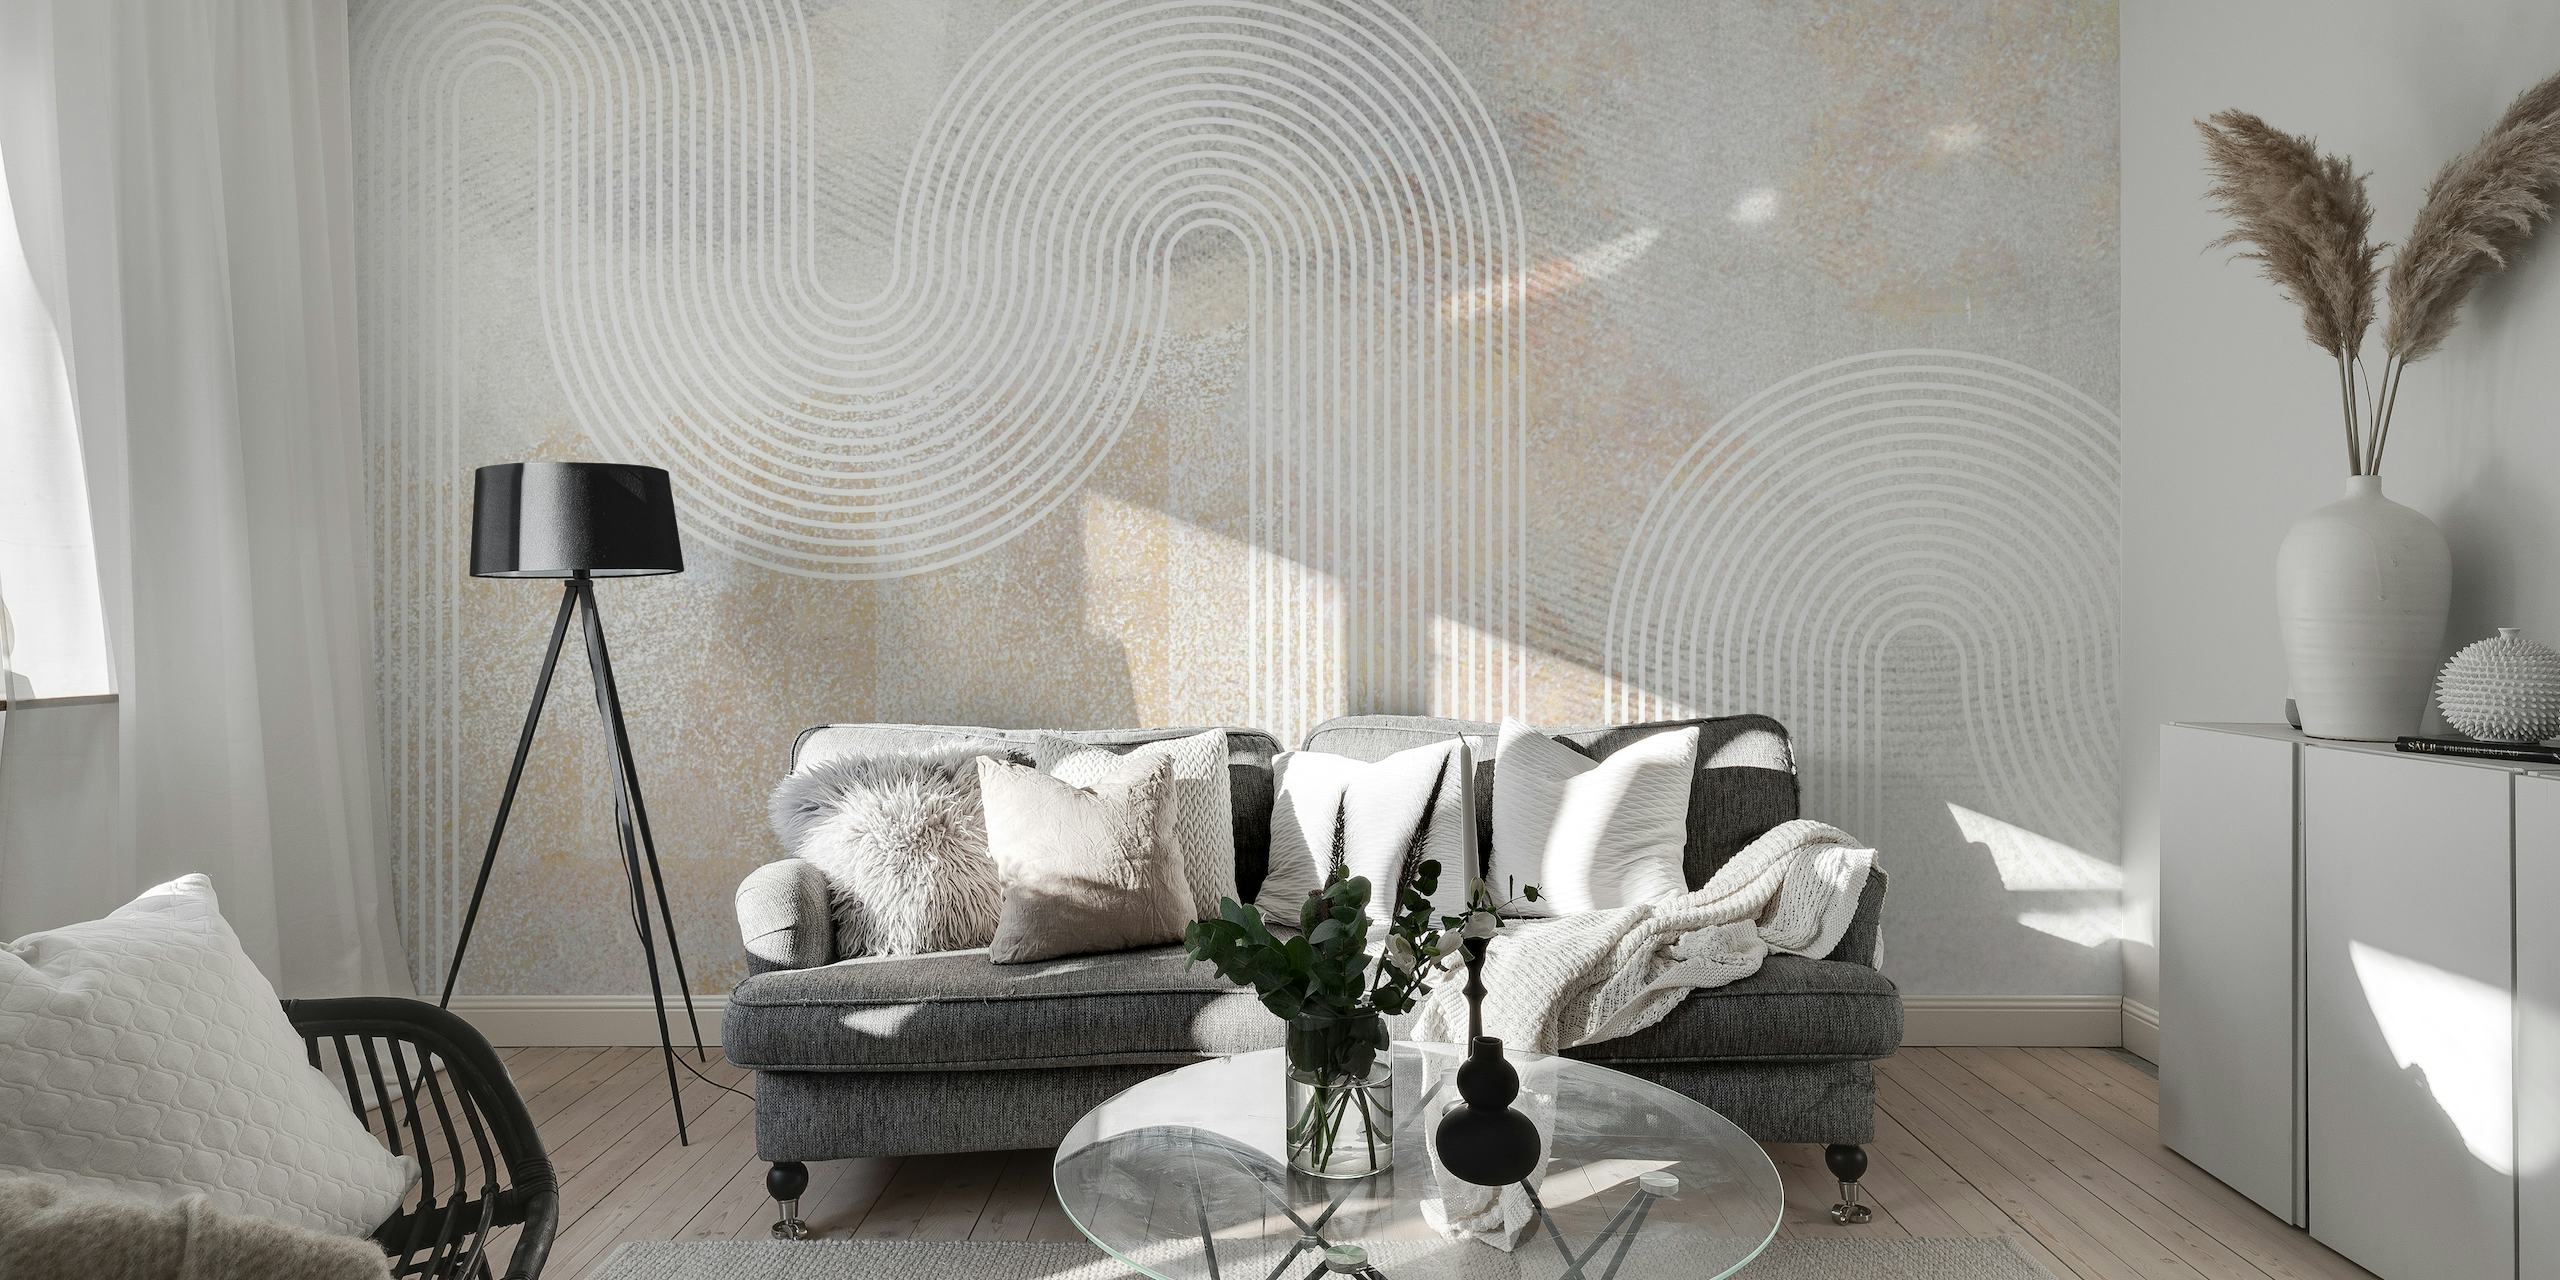 Abstract seventies-inspired neutral wall mural with flowing lines and earth tones